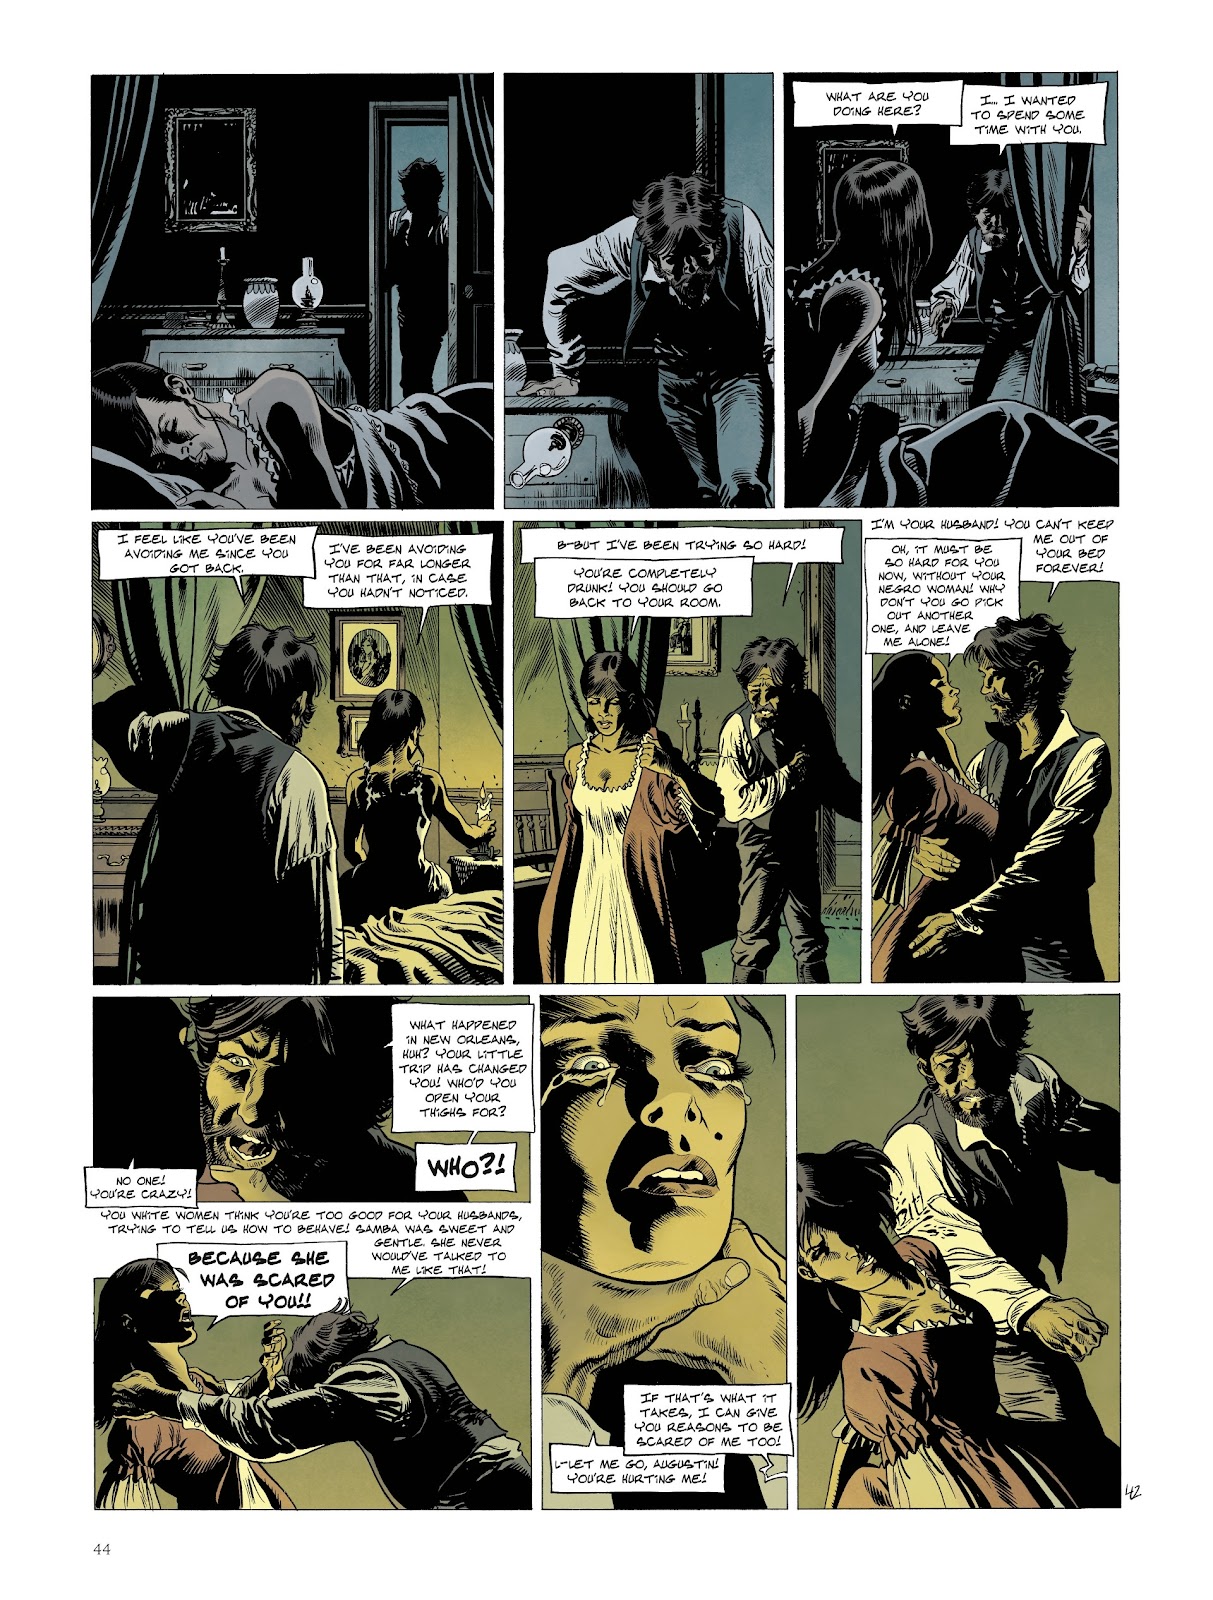 Louisiana: The Color of Blood issue 1 - Page 46